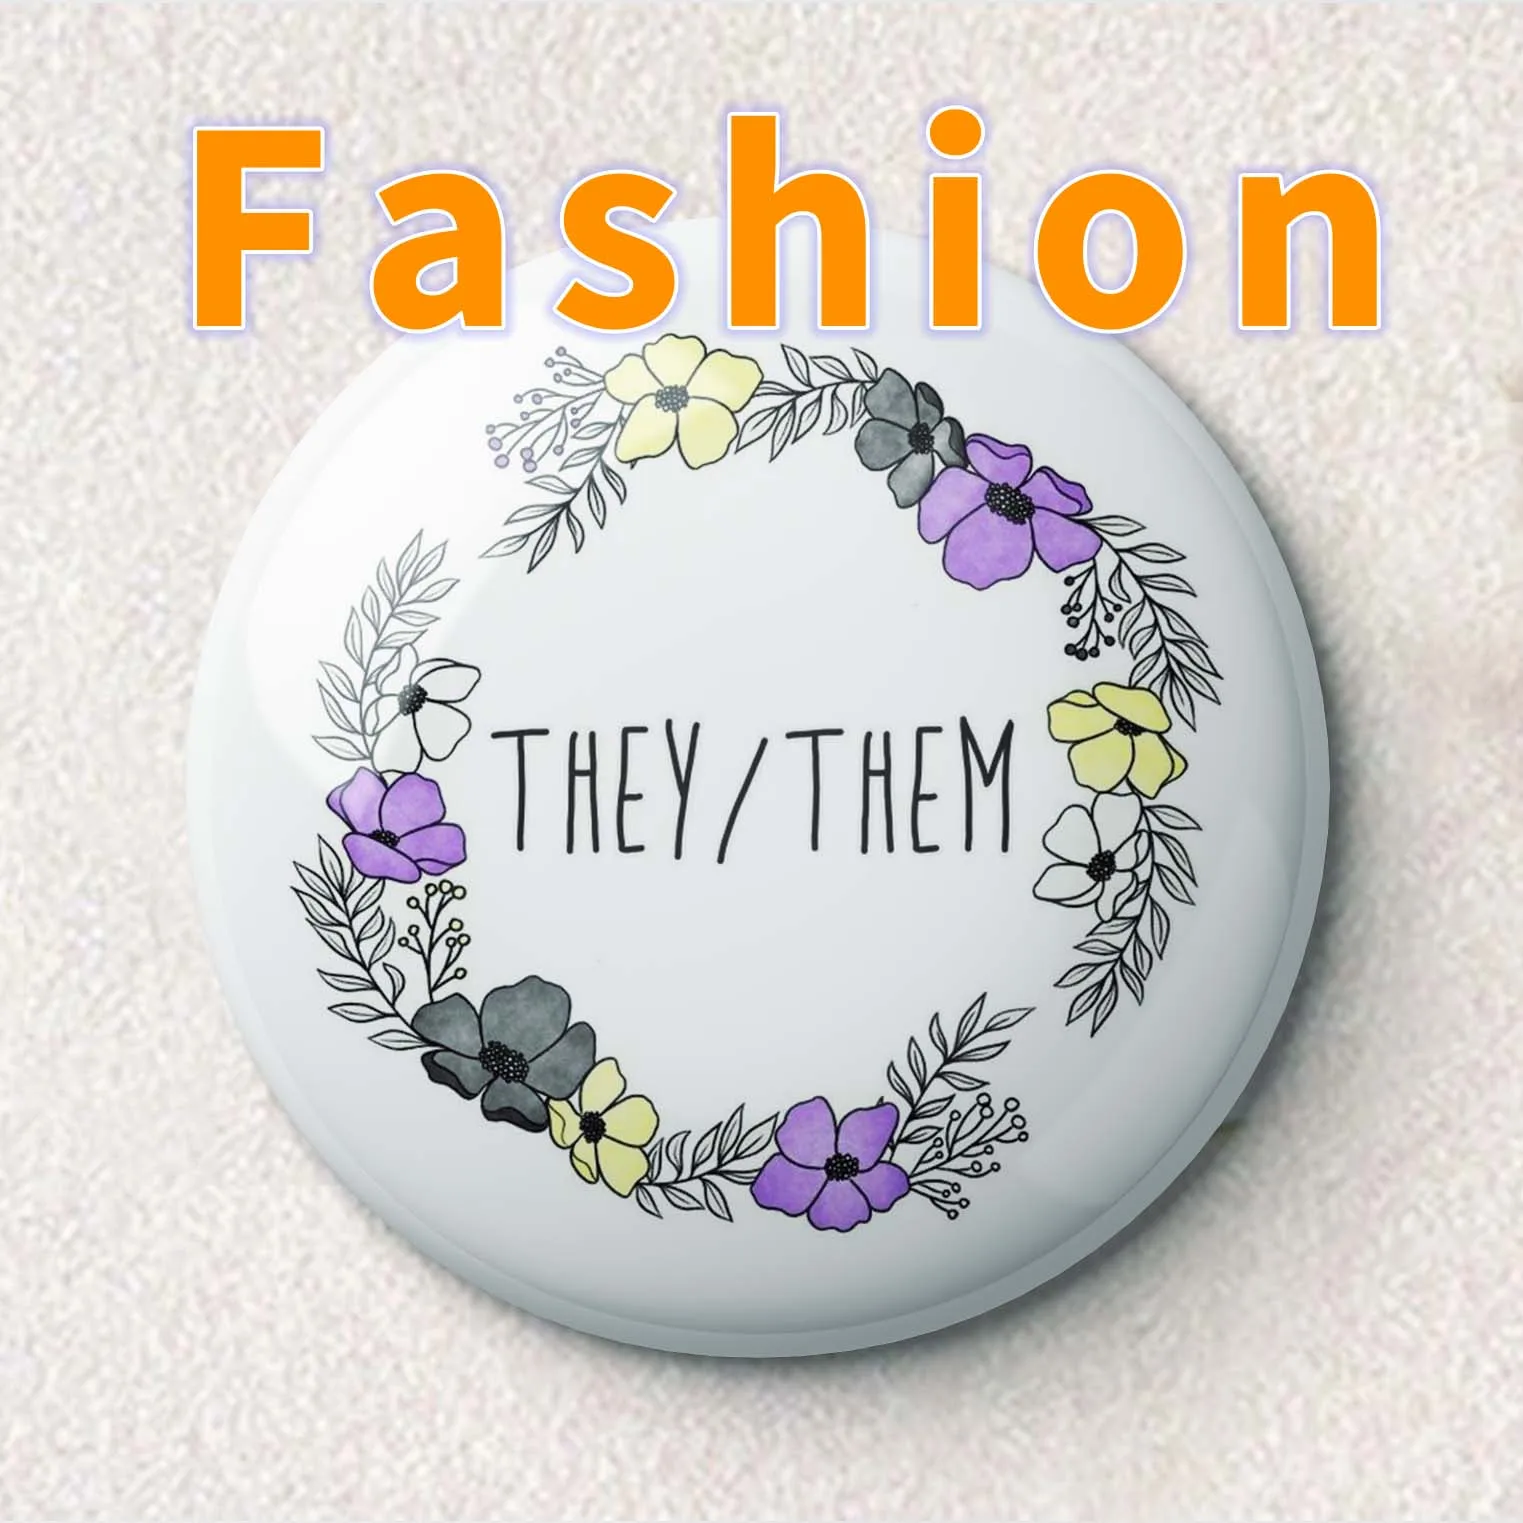 

They Them Nonbinary Flag xip Soft Enamel Pin Clothes Hat Women Decor Metal Brooch Creative Jewelry Cute Badge Funny Collar